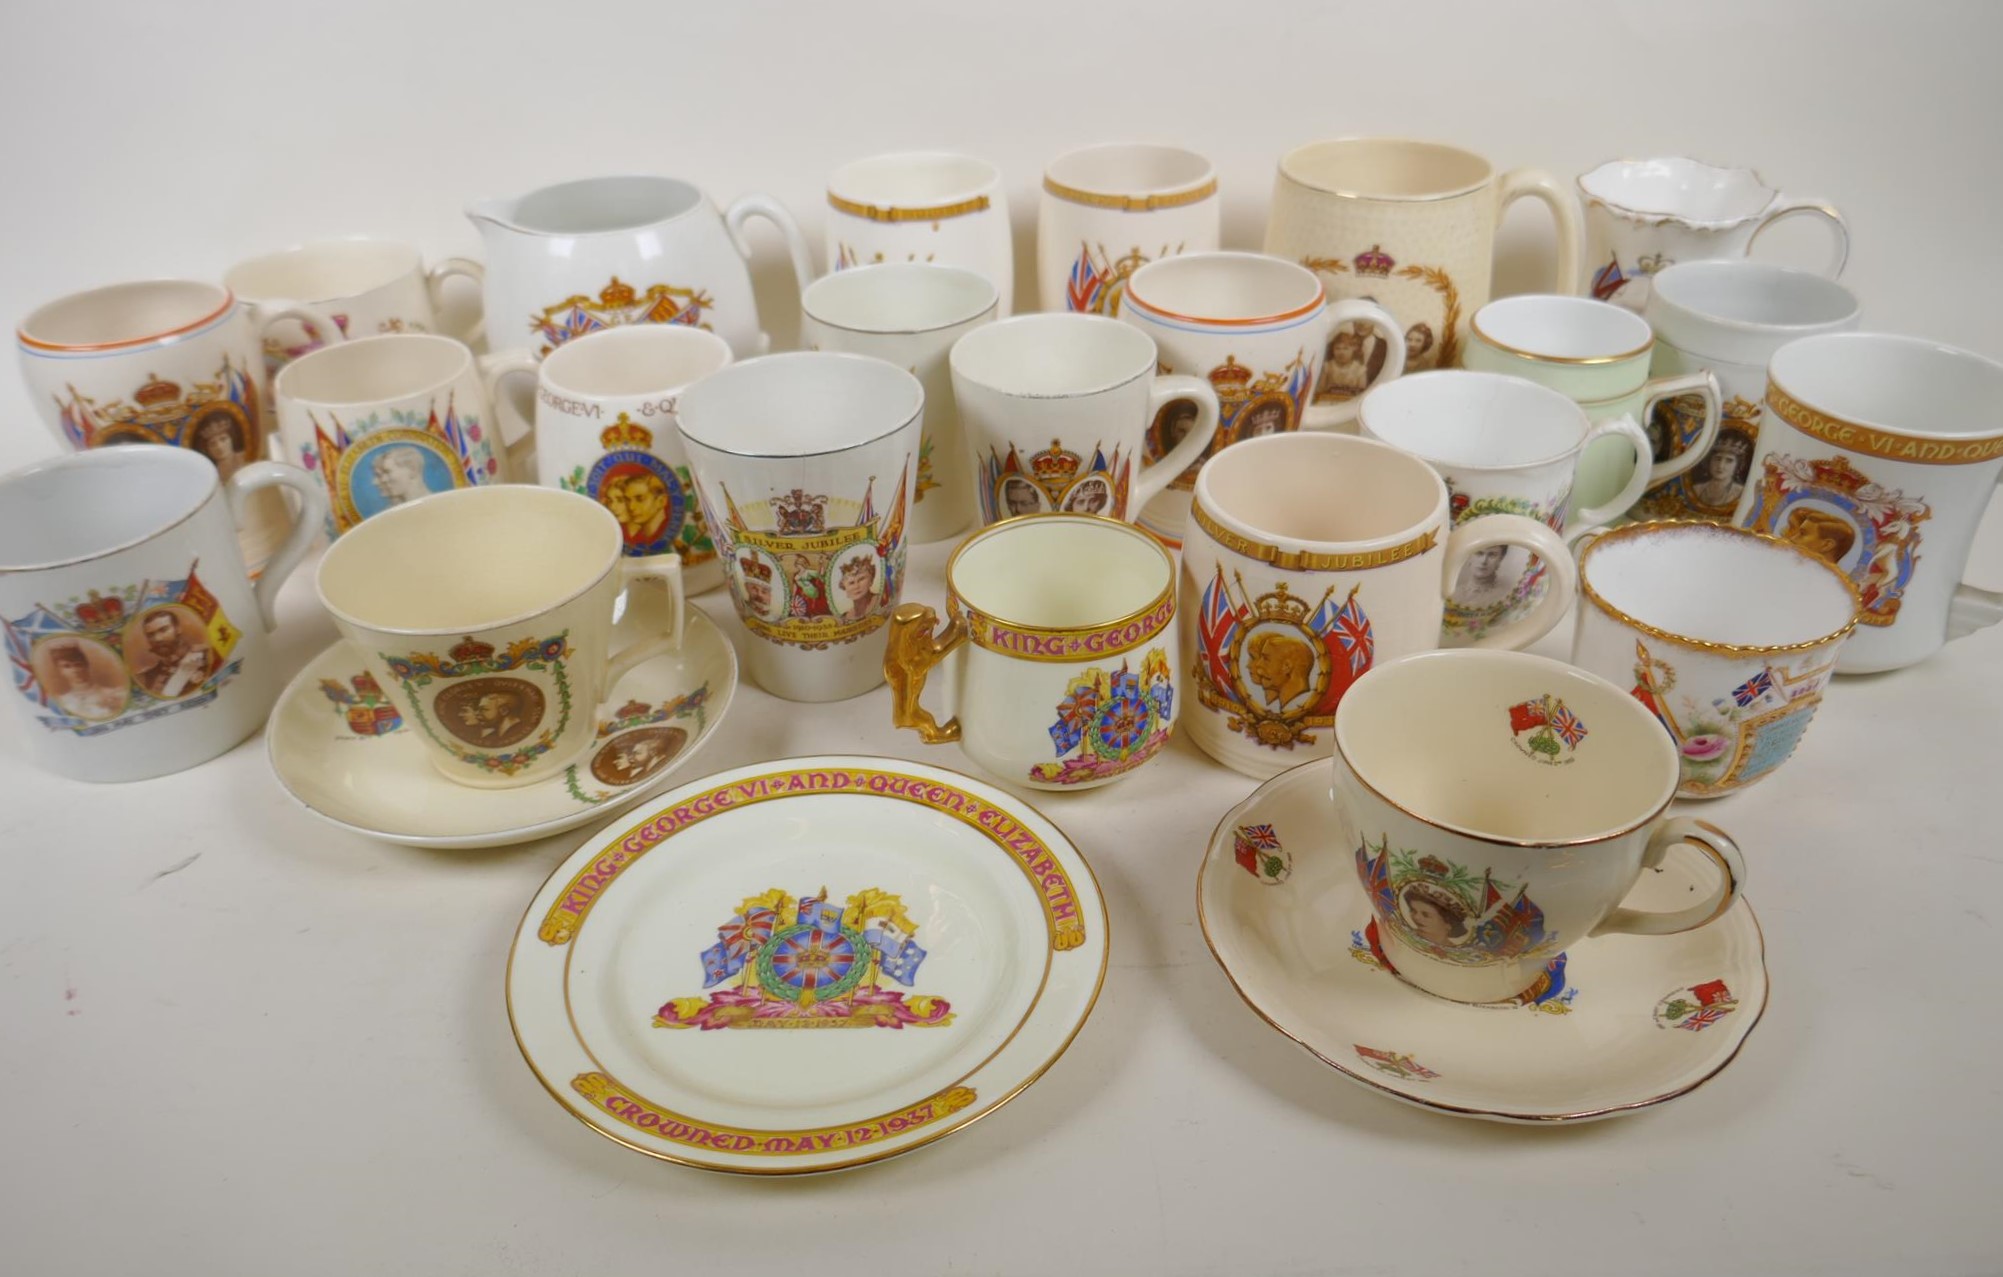 Over twenty four items of early to mid C20th royal commemorative wares, jug, mugs etc